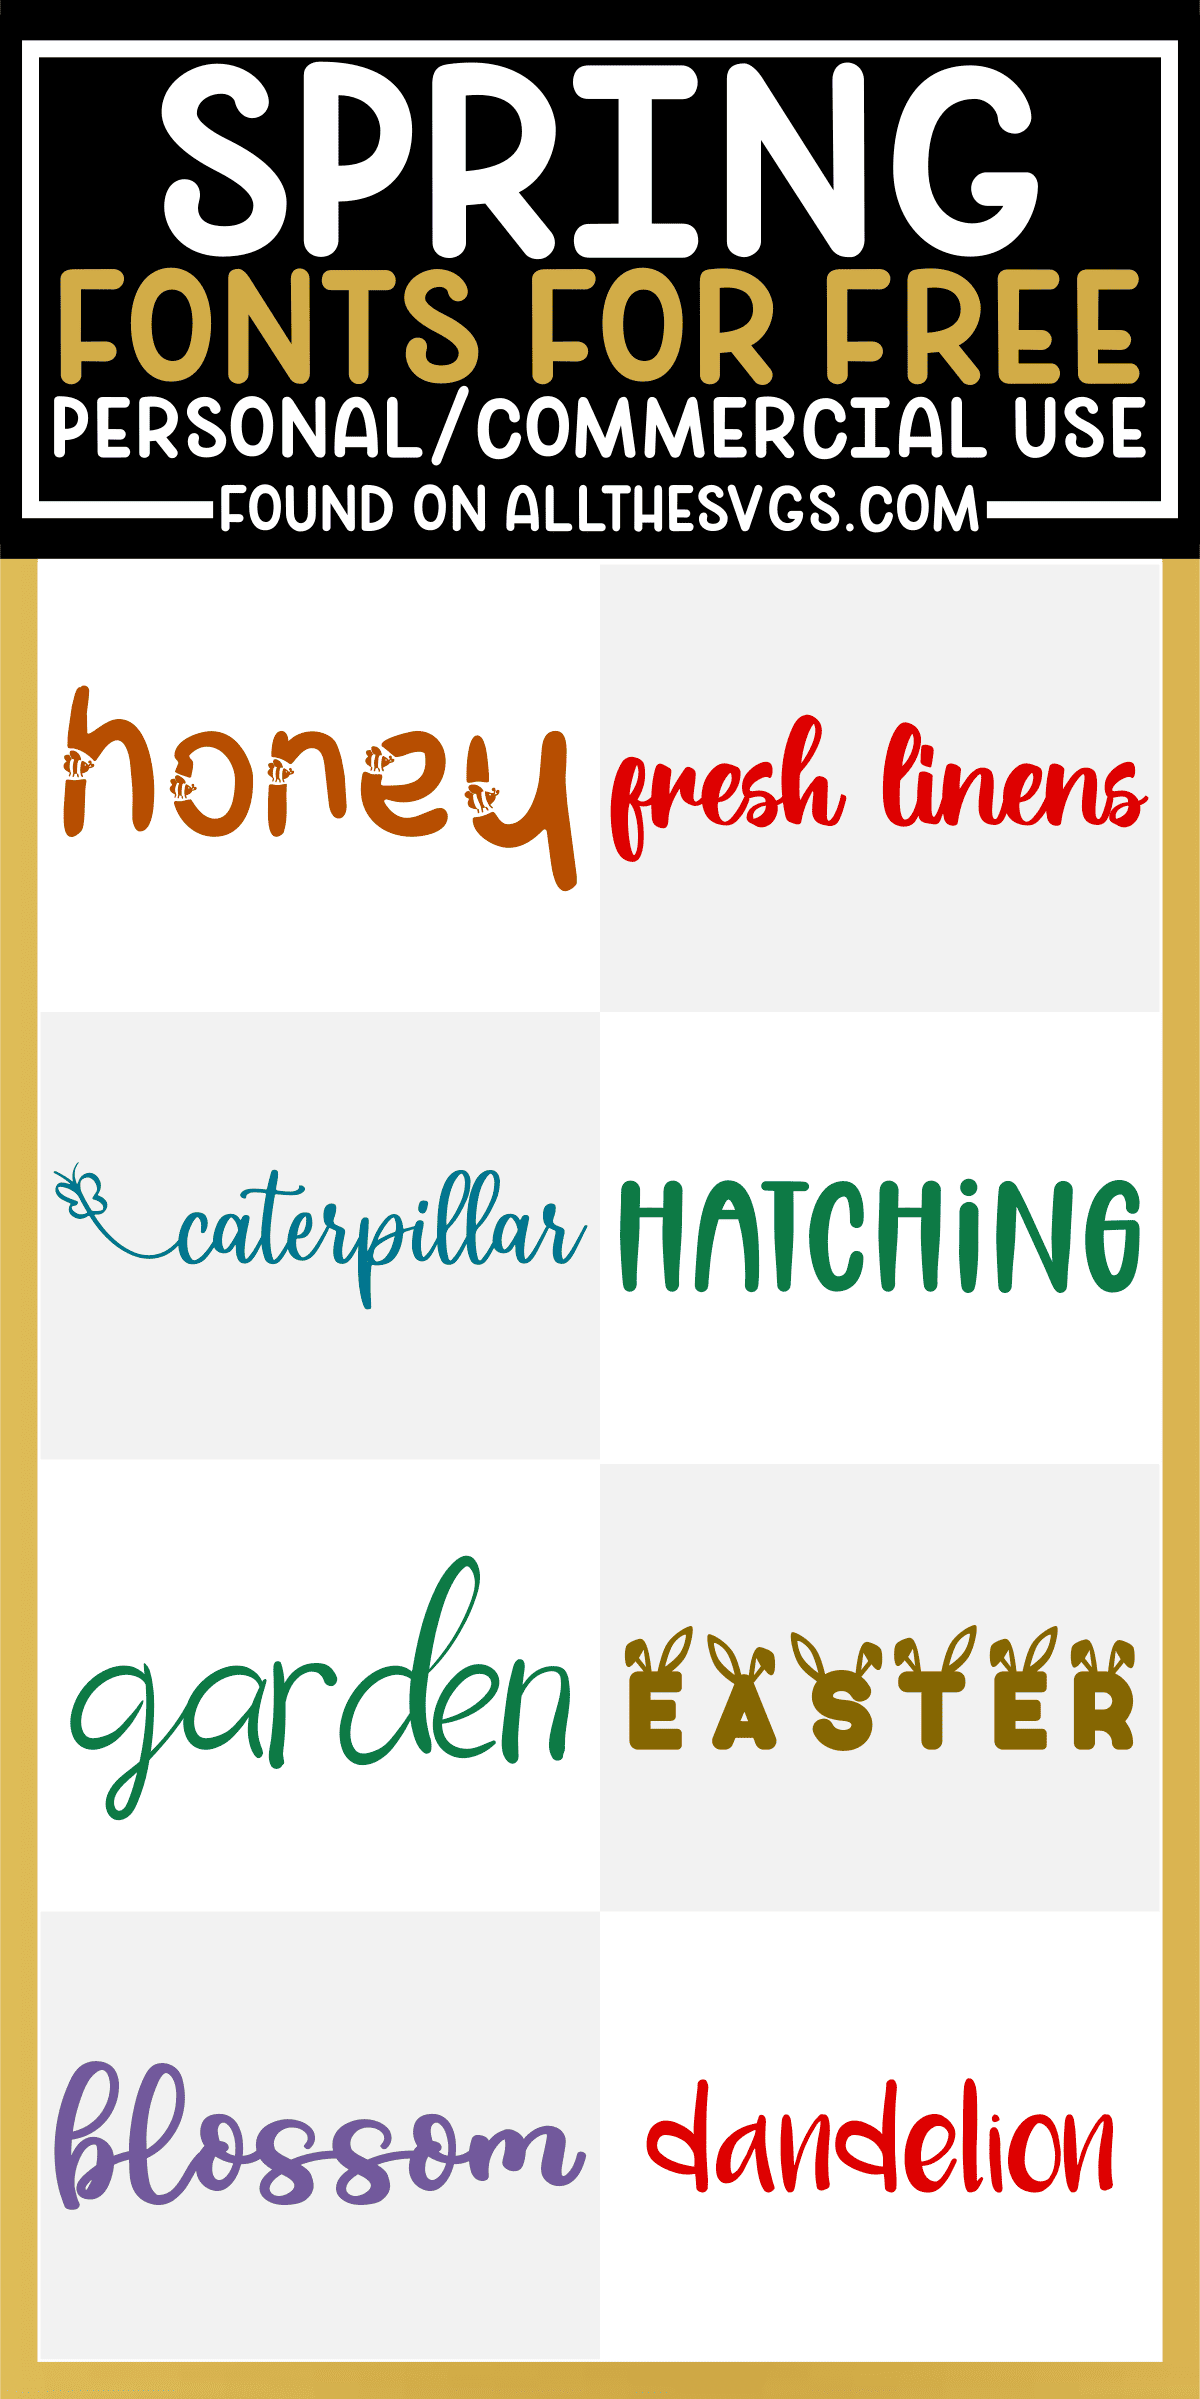 showcase of 8 best free spring fonts for commercial use.